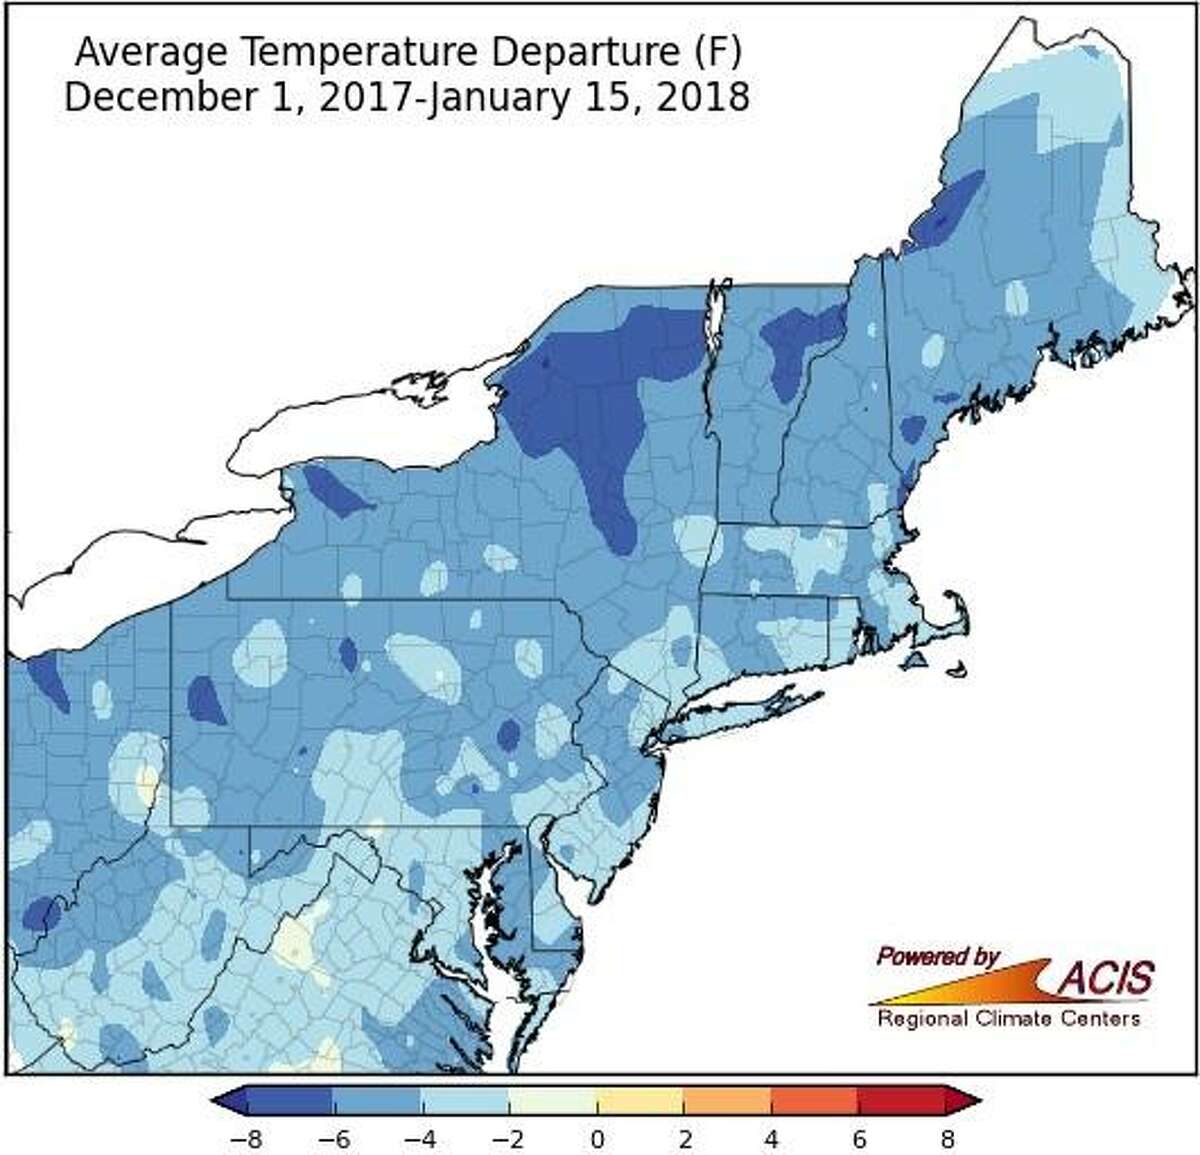 According to the Northeast Regional Climate Center, from Dec. 1, 2017 to Jan. 15, 2018, Sikorsky Memorial Airport’s temperature was 3.6 degrees below normal.